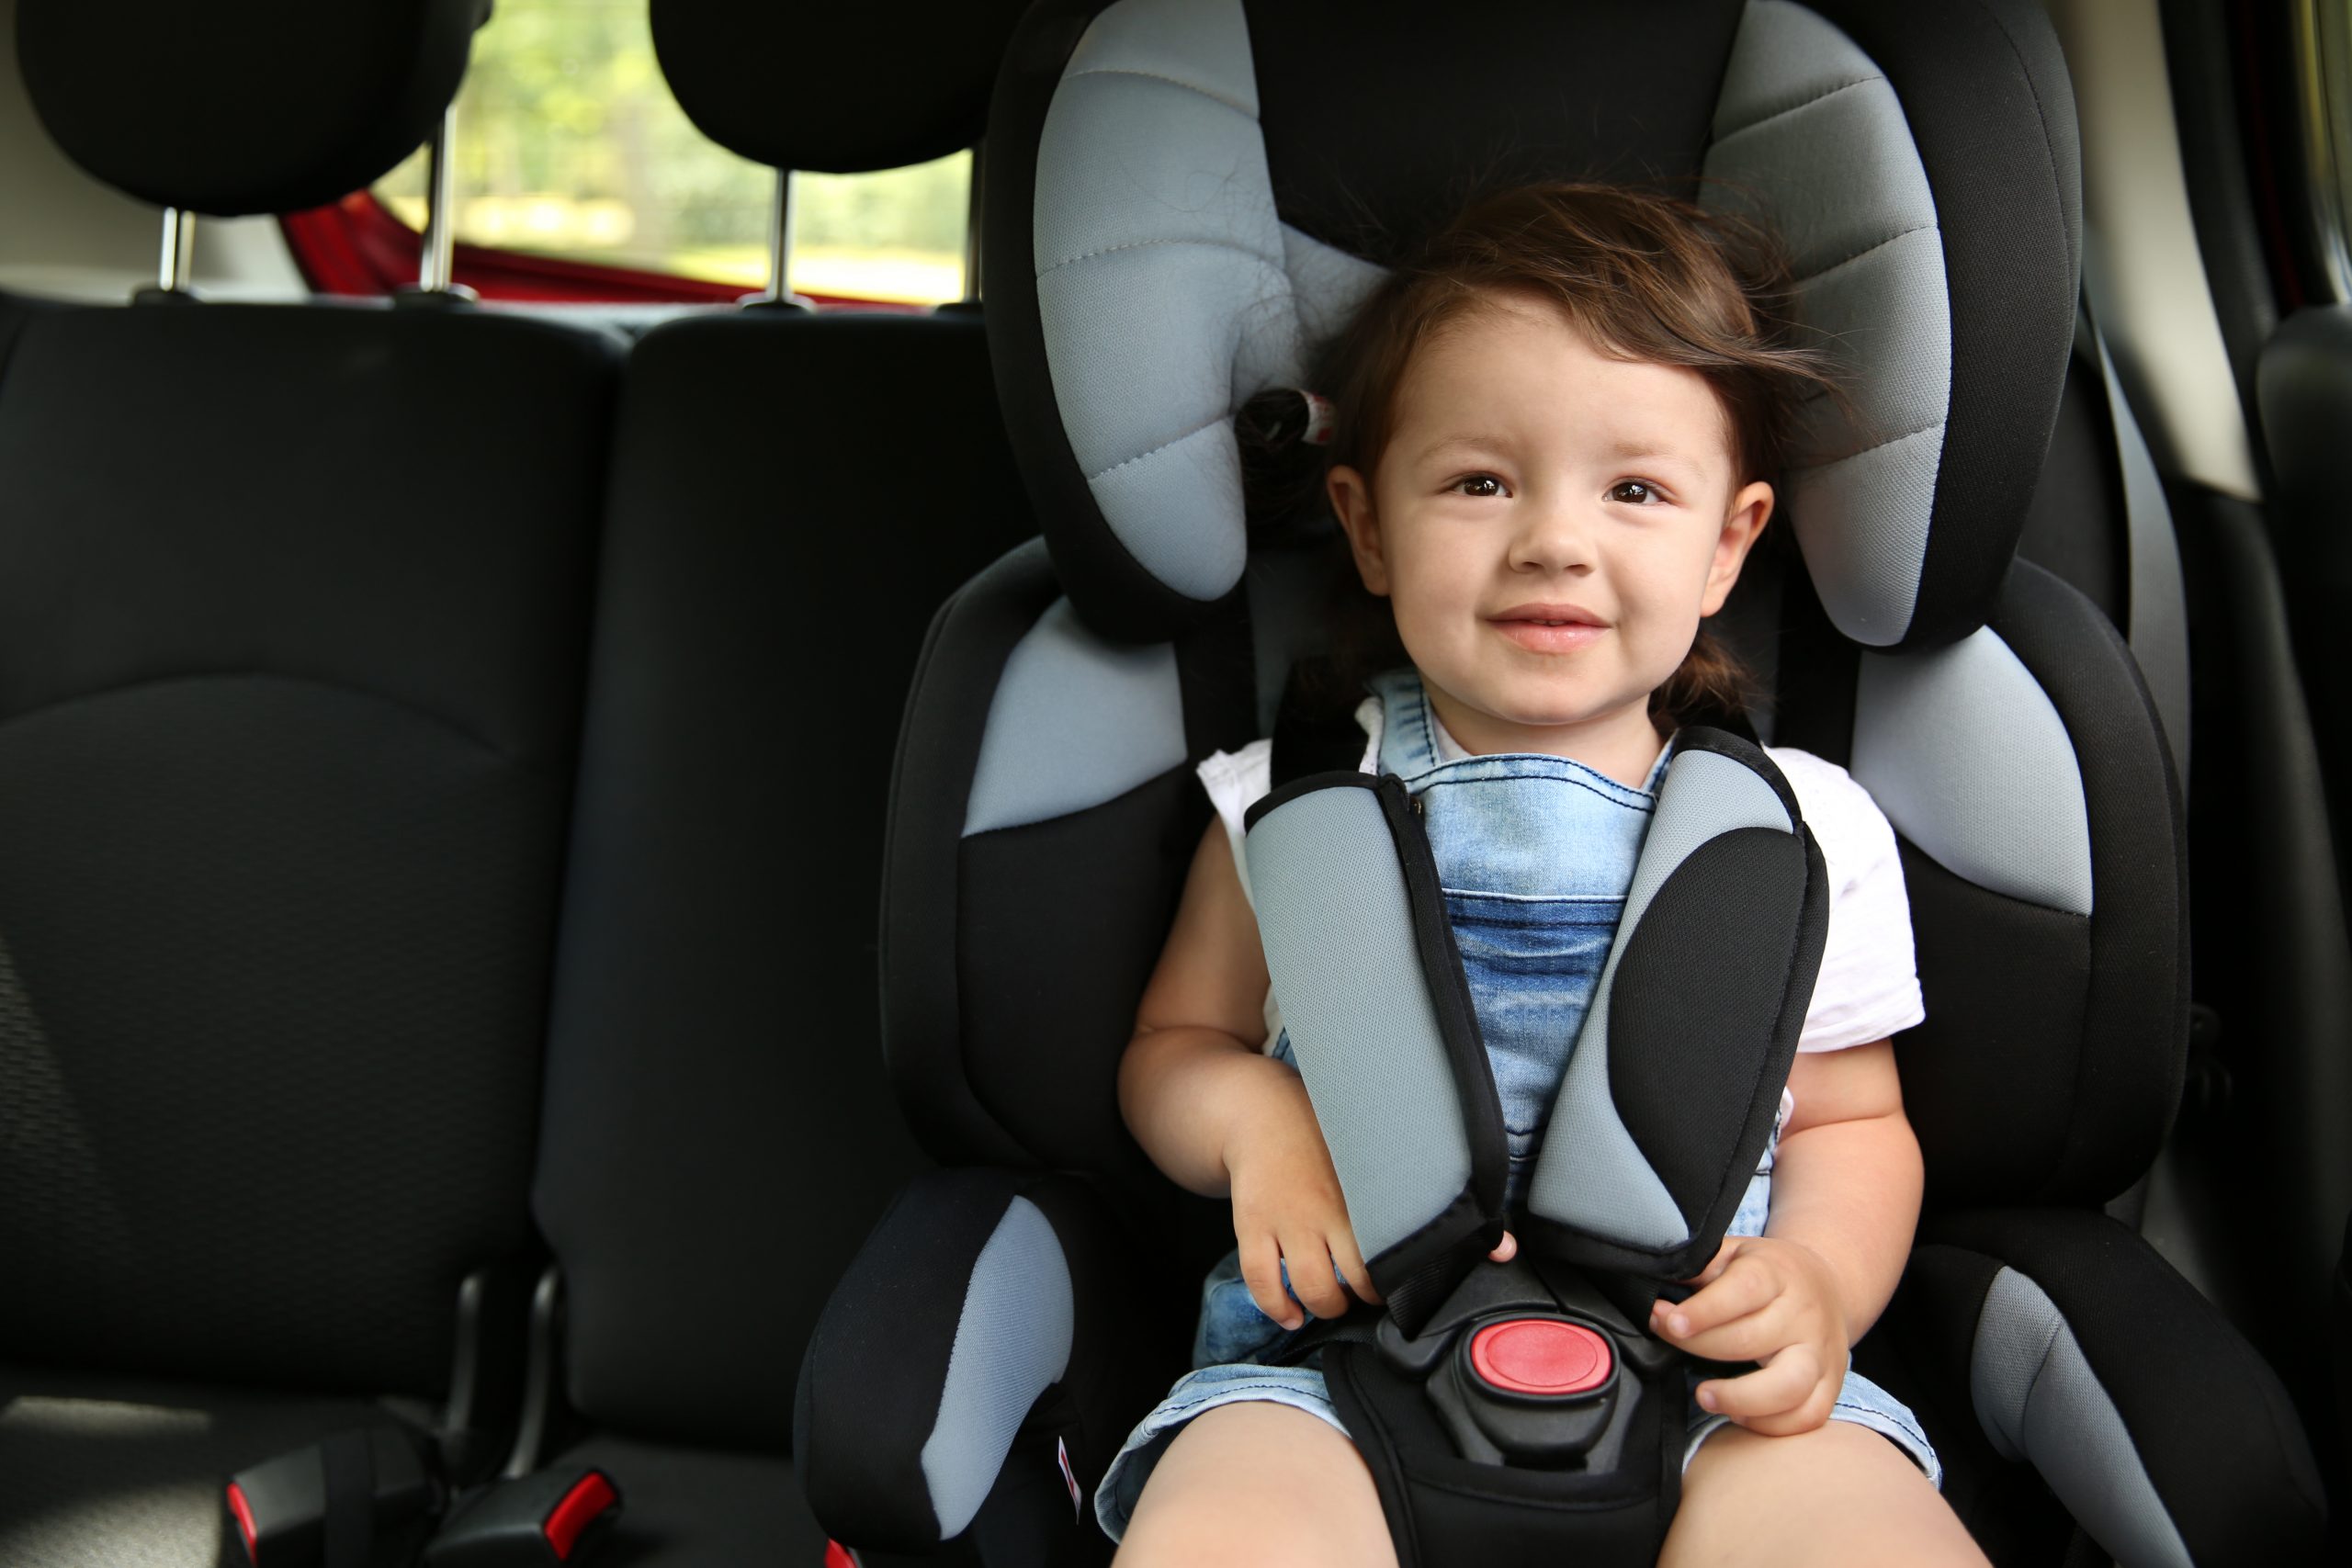 How To Make Car Seat More Comfortable